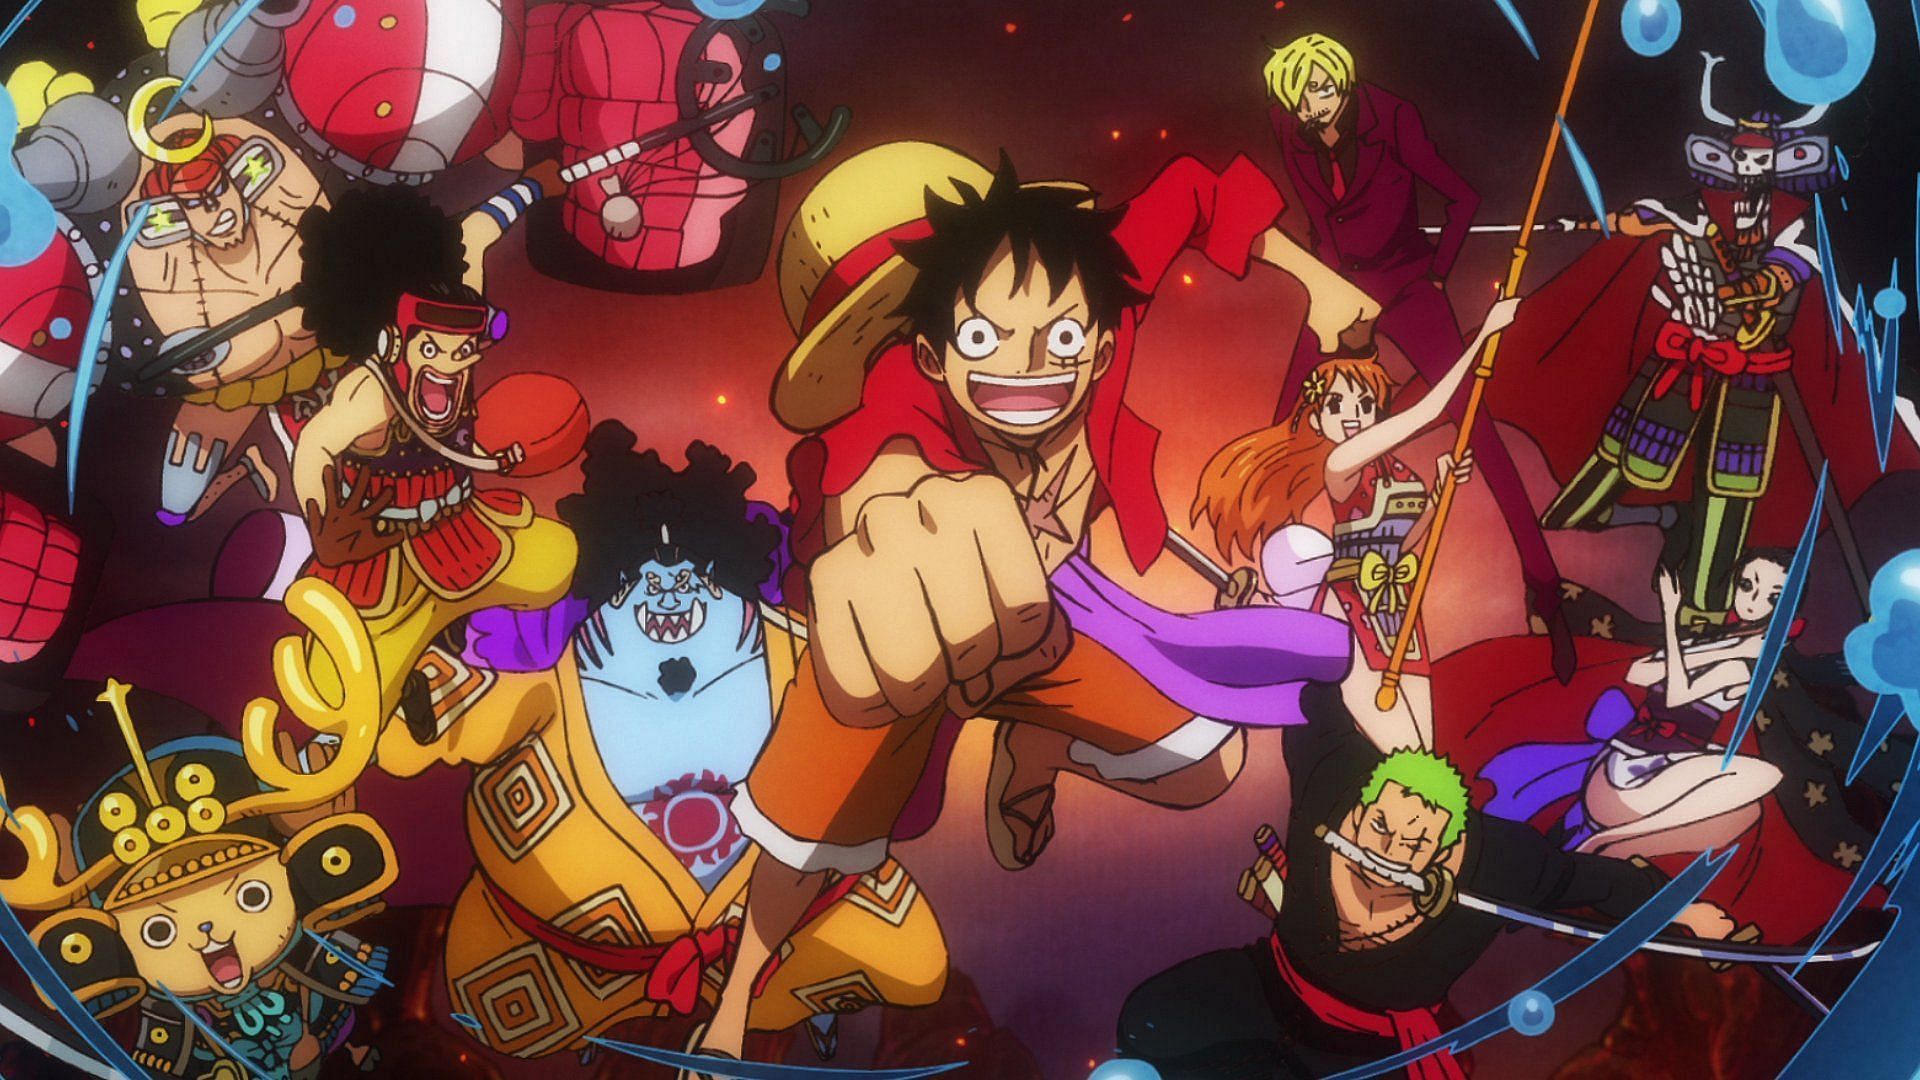 One Piece: The Current State of the Straw Hat Pirates (spoilers